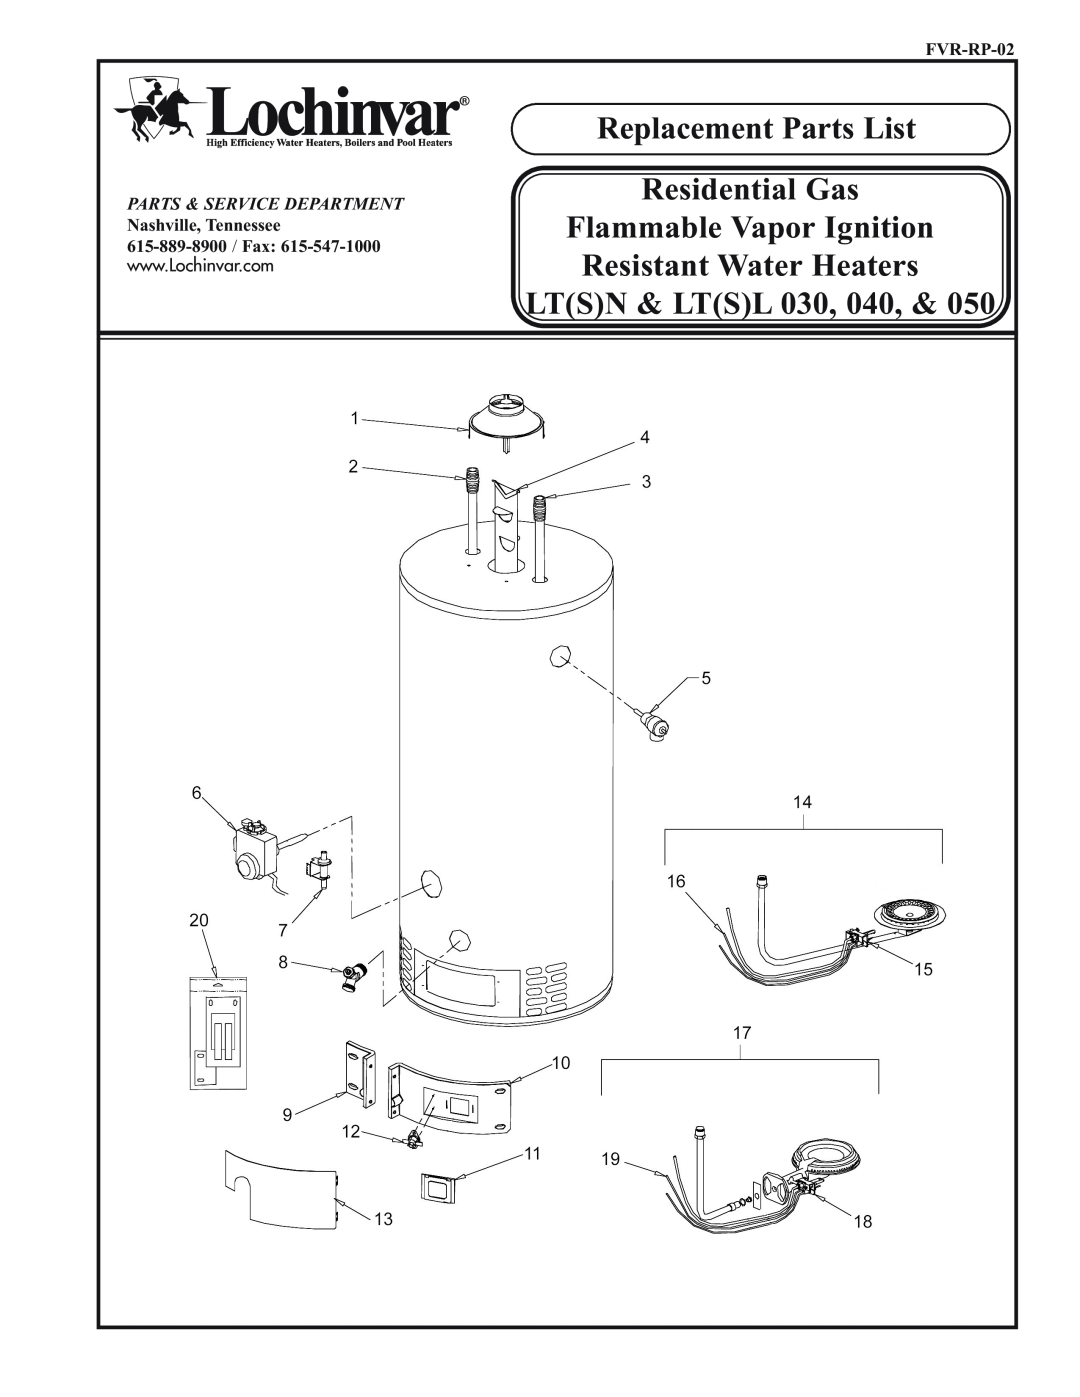 Lochinvar LT(S)L 040 manual Replacement Parts List Residential Gas, Flammable Vapor Ignition Resistant Water Heaters 